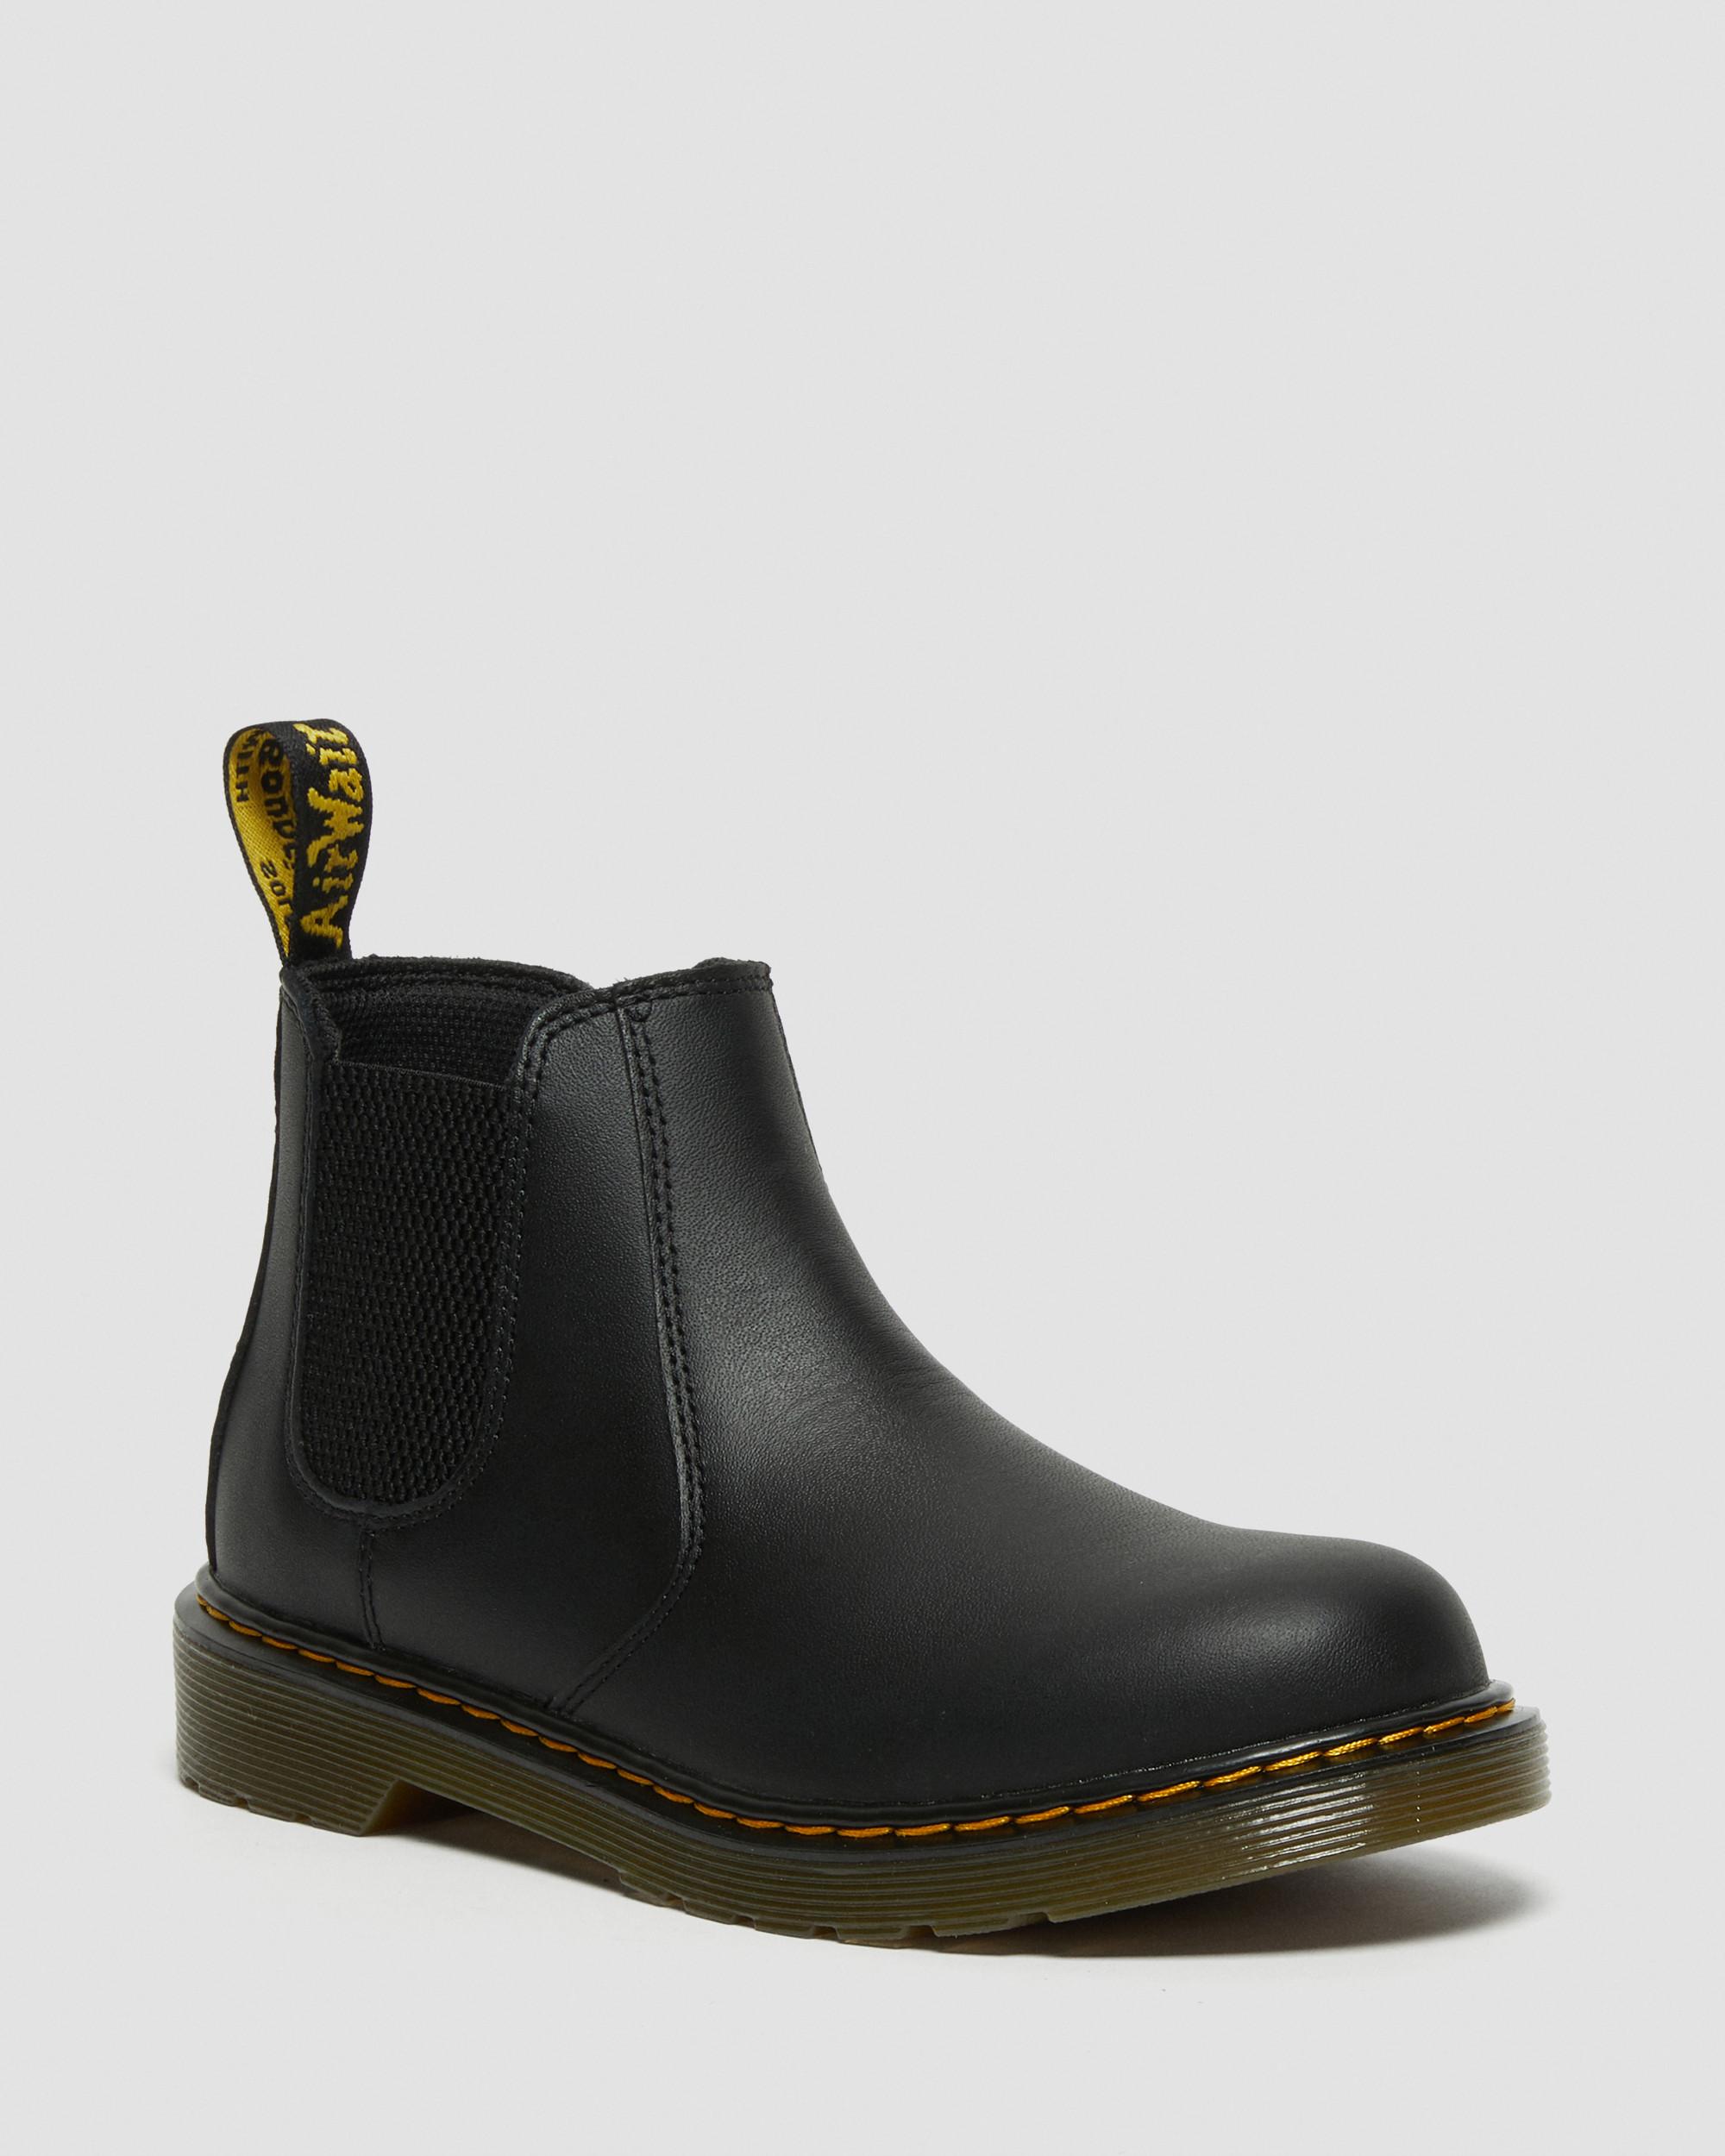 Youth 2976 Softy T Leather Chelsea Boots, Black | Dr. Martens